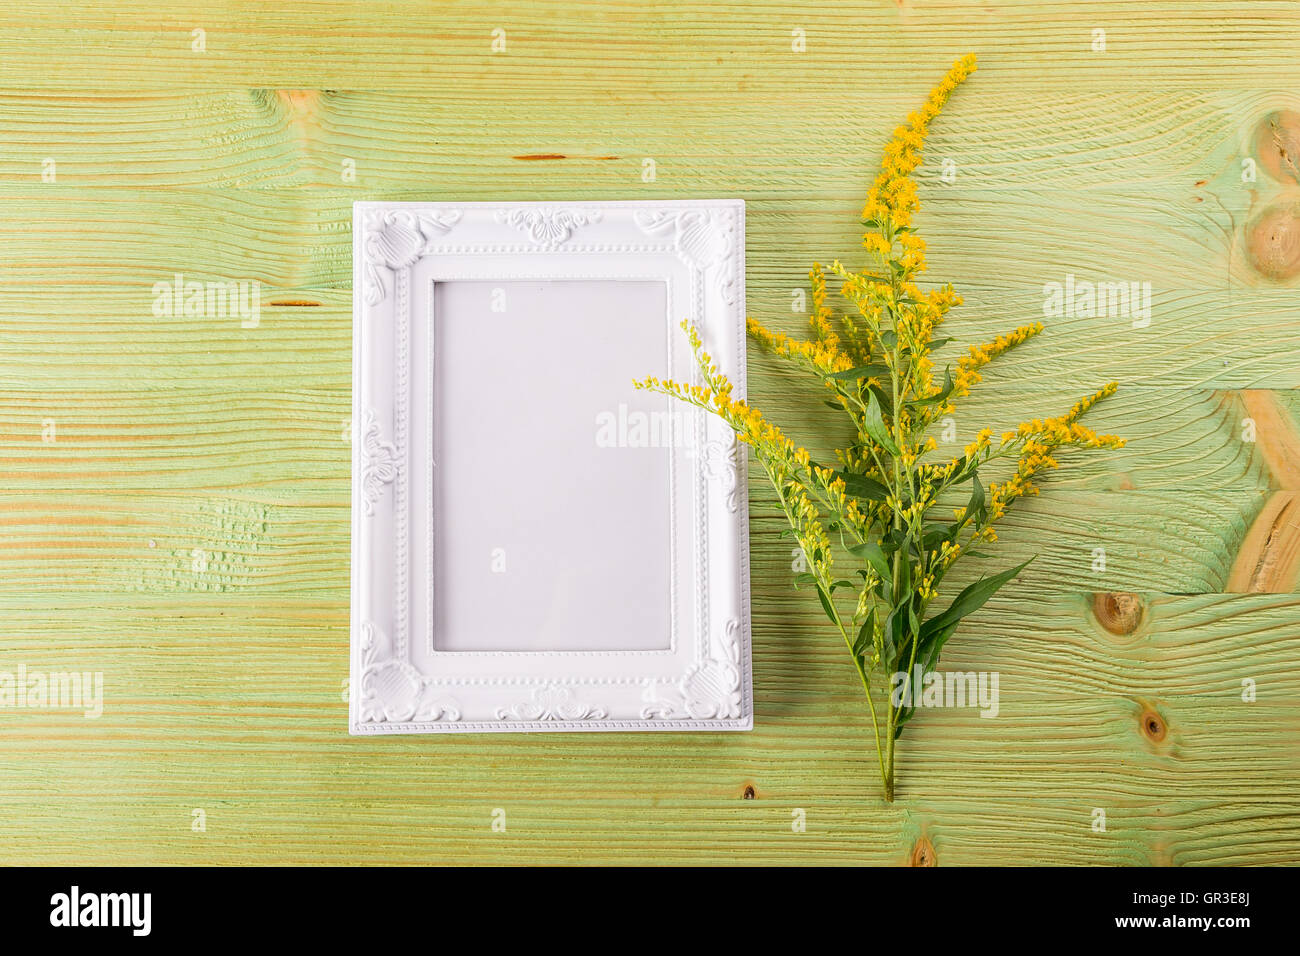 Craft mockup set with Yellow wild flowers and whitw photo frame on a light wooden table Stock Photo